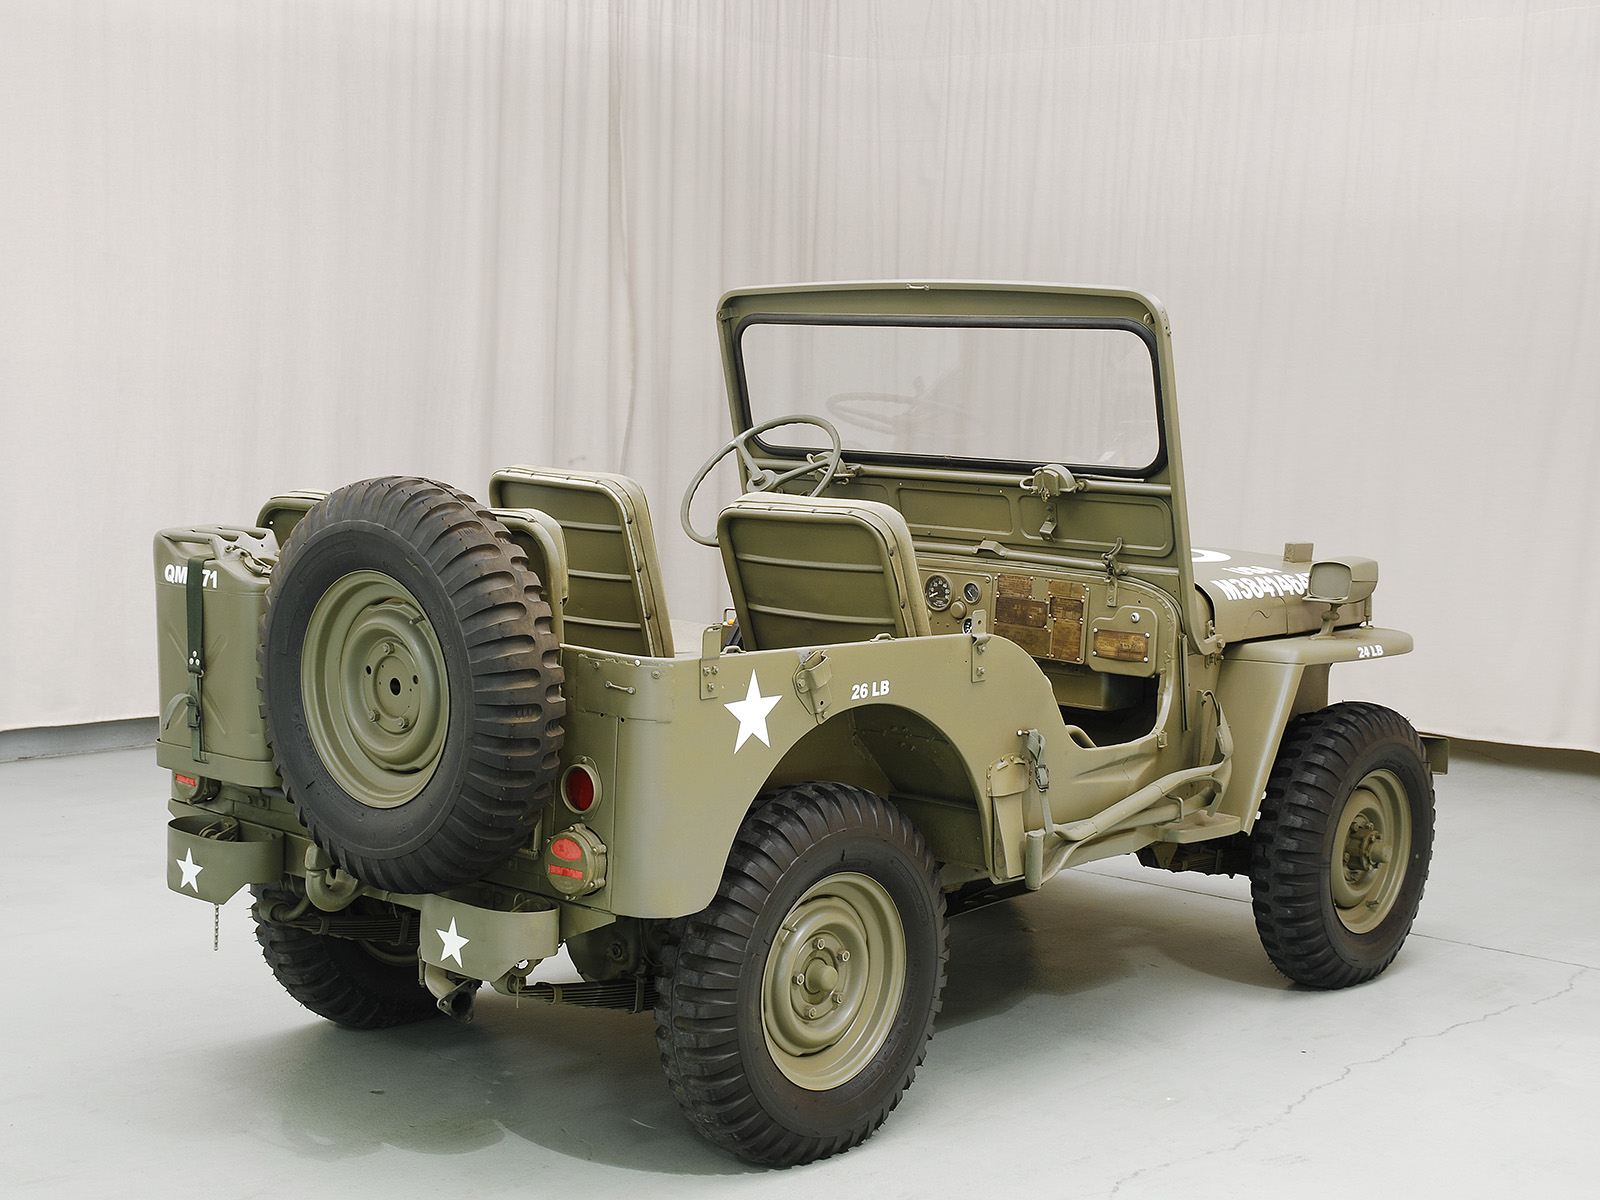 1949 Willys-Overland M38 1/4 Ton